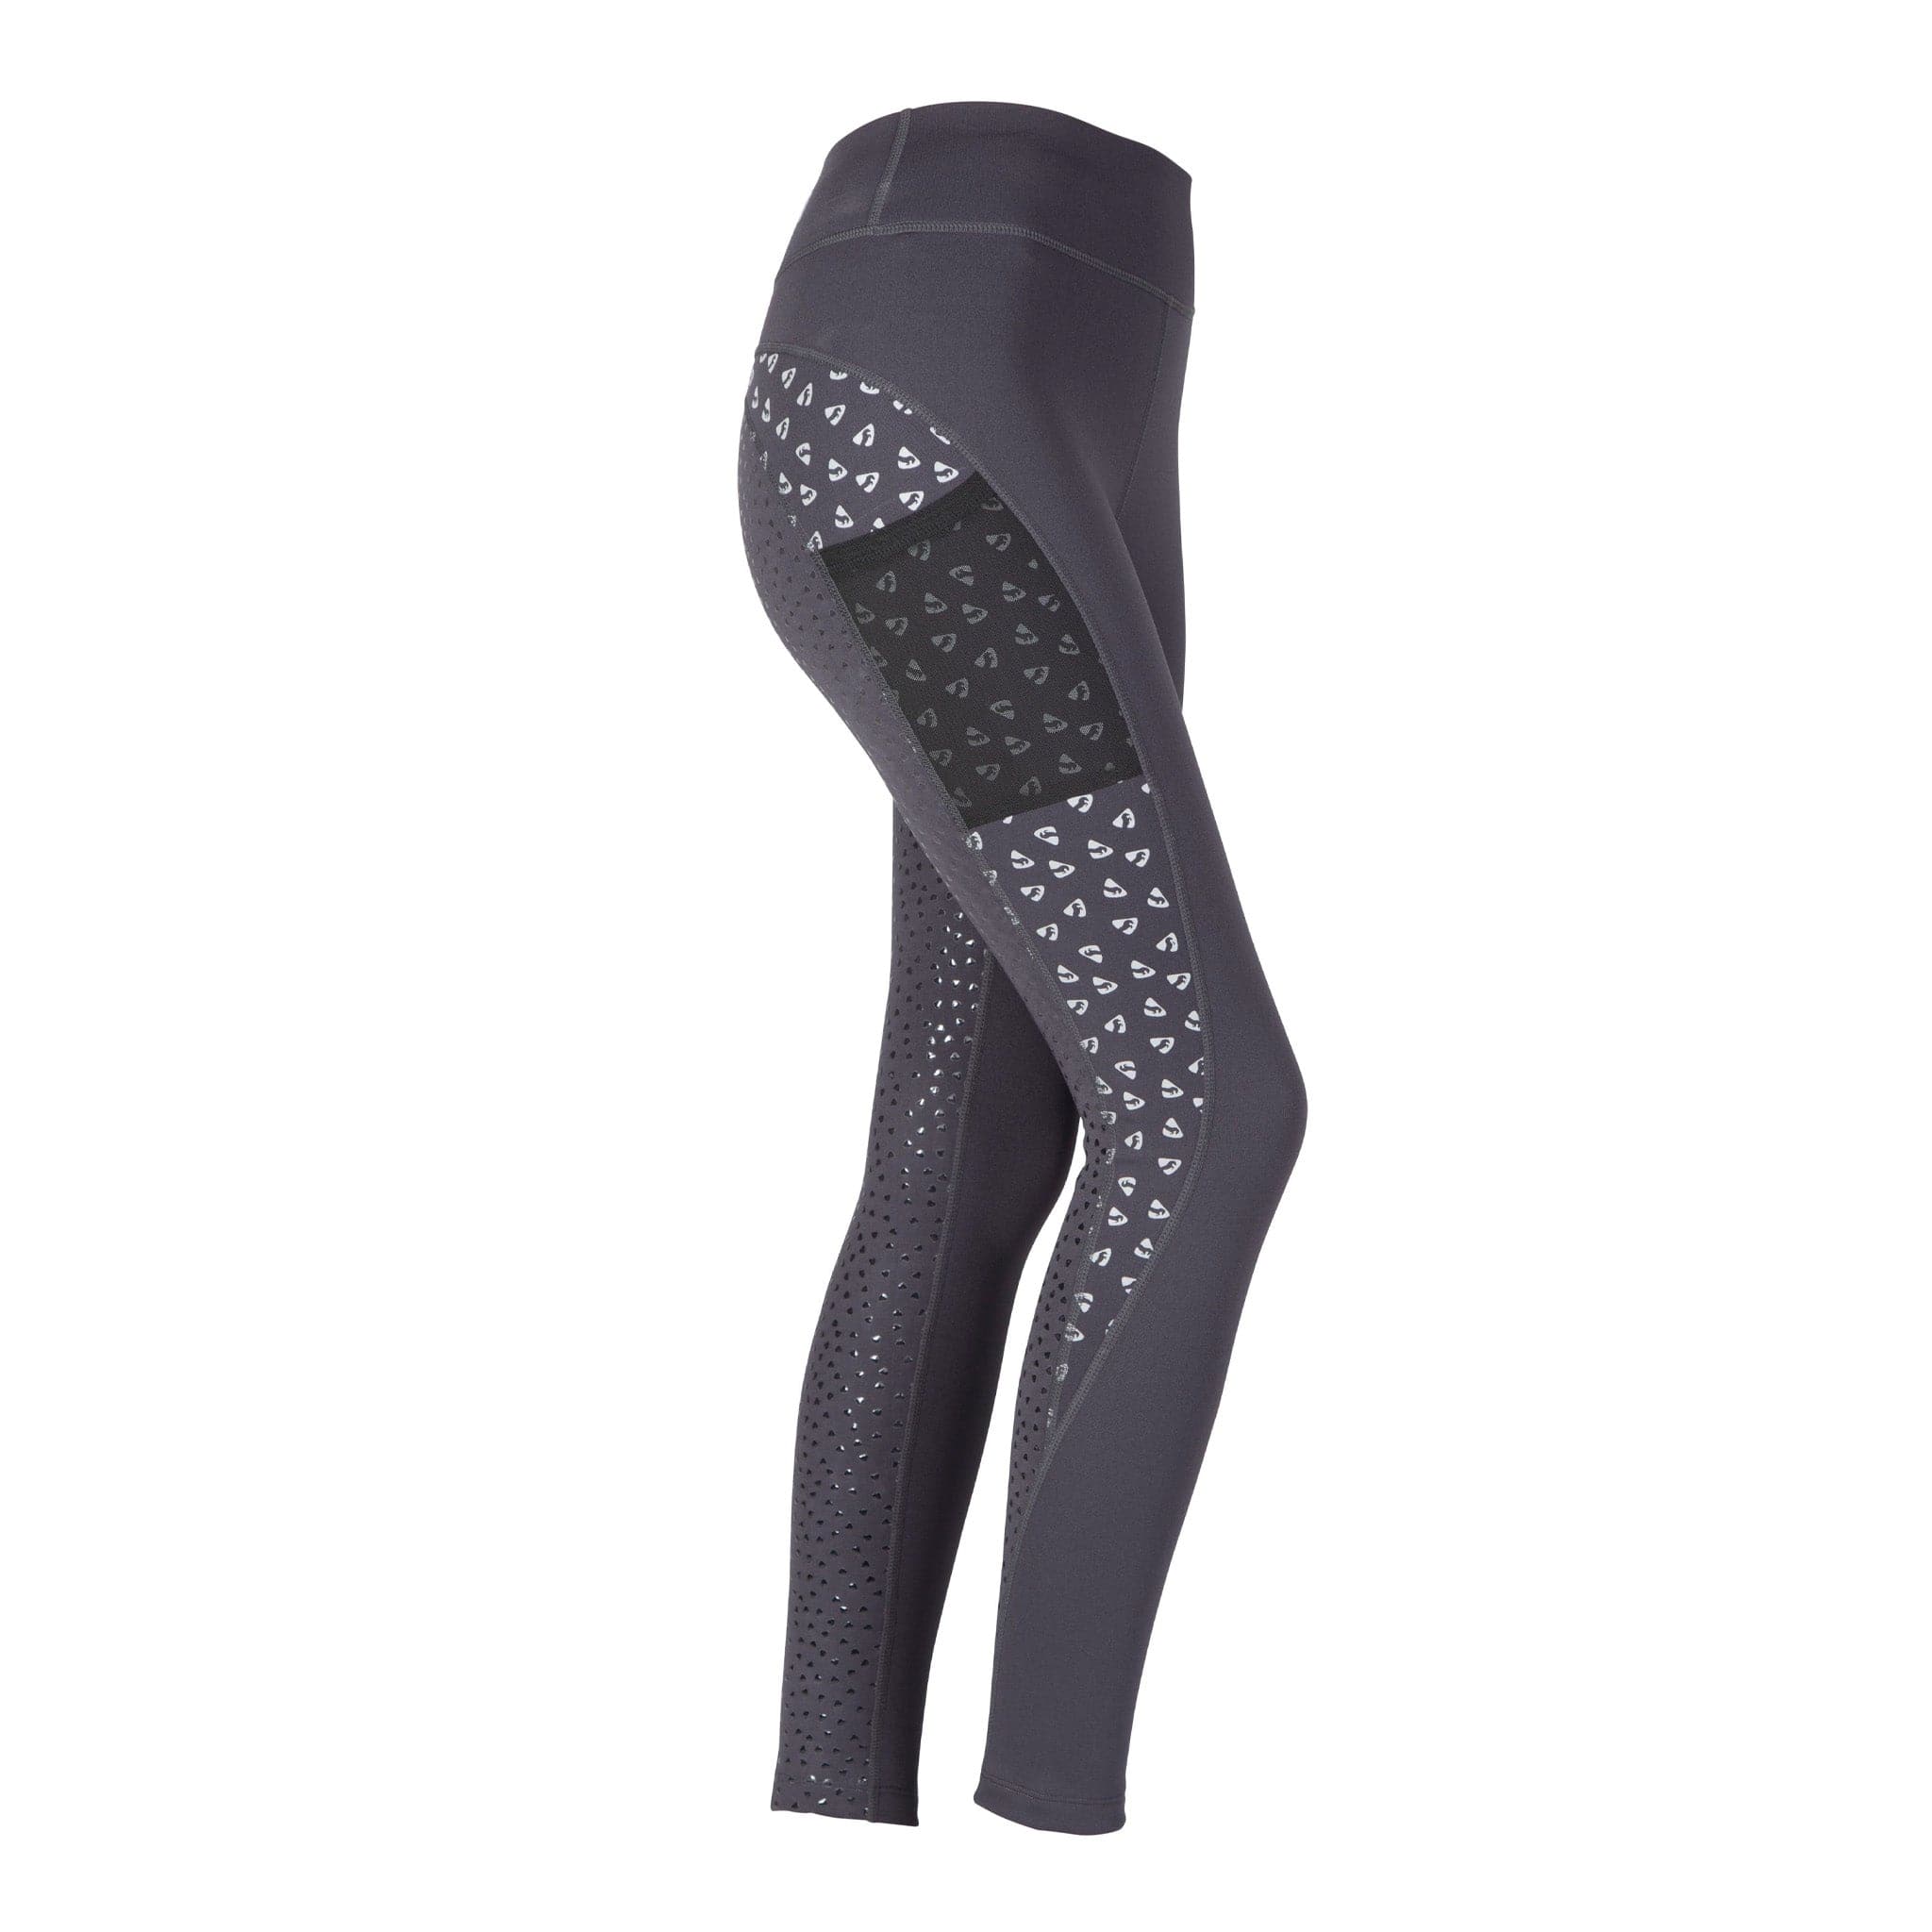 Aubrion Children's Coombe Riding Tights Black Reflective 8306